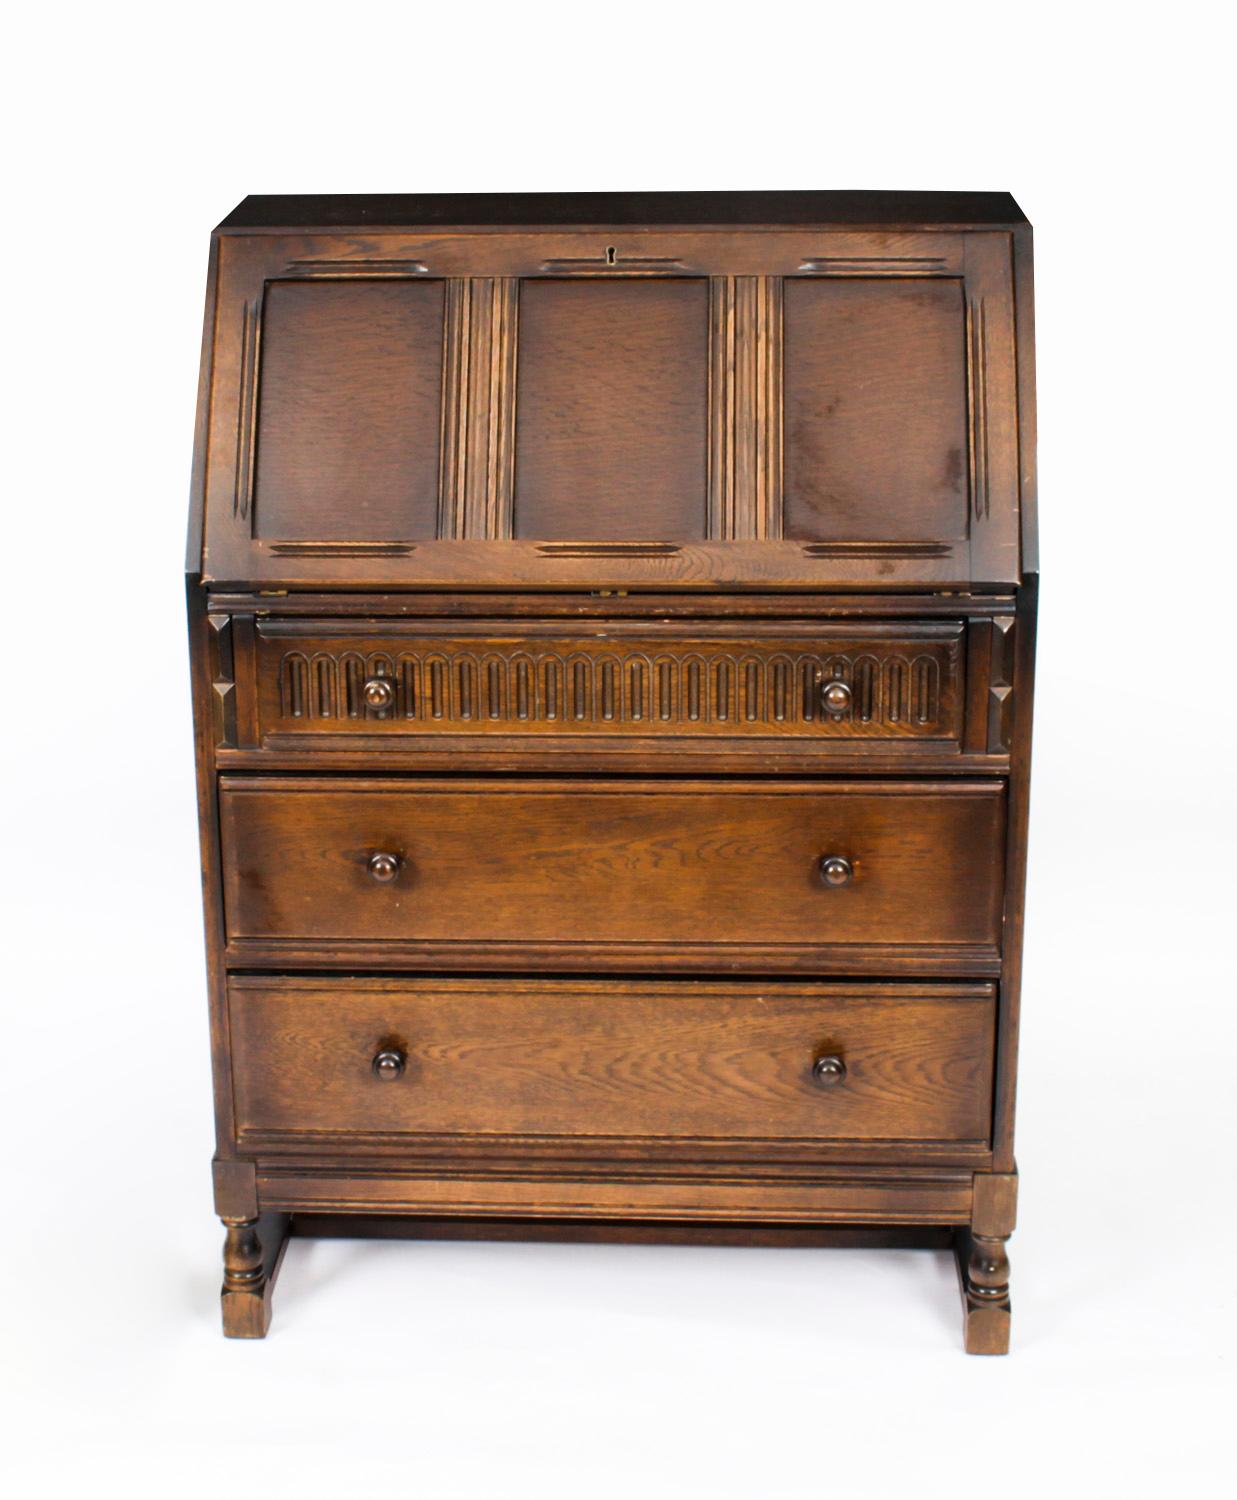 A delightful Jacobean Revival oak bureau, mid 20th century in date.

Condition:
In good condition. As a vintage item, the bureau show signs of use commensurate with age

Dimensions in cm:
Height 108 x width 76 x depth 41

Dimensions in